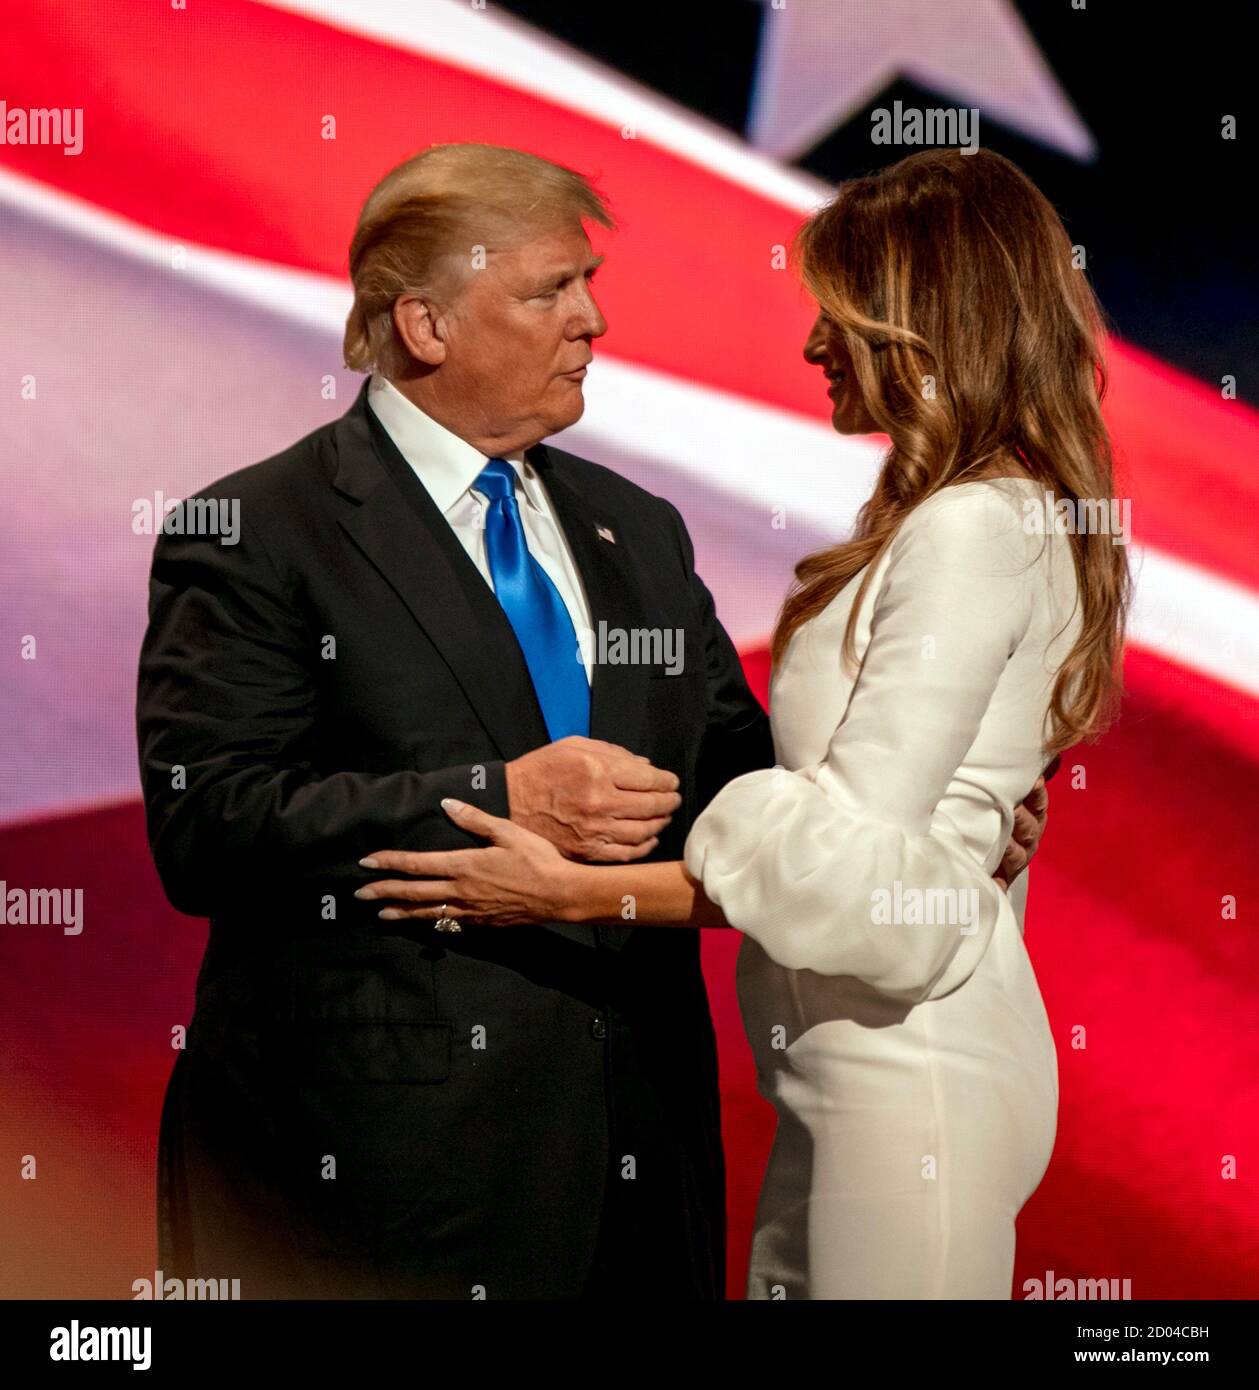 Cleveland Ohio, USA, 18th July, 2016 Future First Lady Melania Trump gets a  hug and kiss from her husband Presidential candidate Donald Trump after she  gave an address to the Republican National